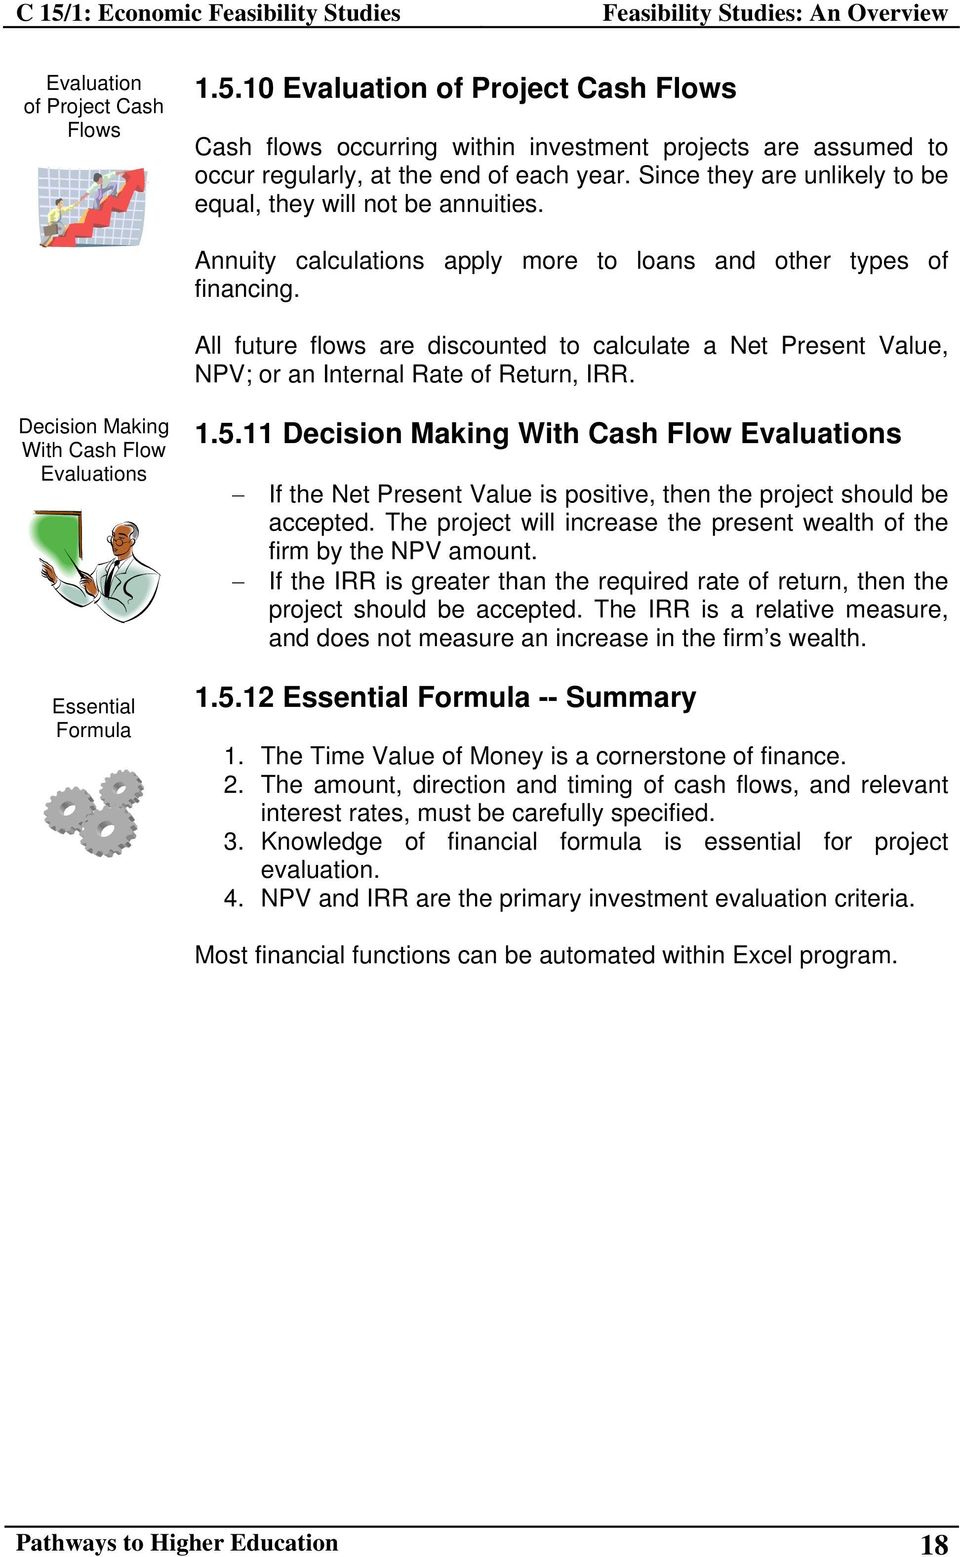 All future flows are discounted to calculate a Net Present Value, NPV; or an Internal Rate of Return, IRR. Decision Making With Cash Flow Evaluations Essential Formula 1.5.